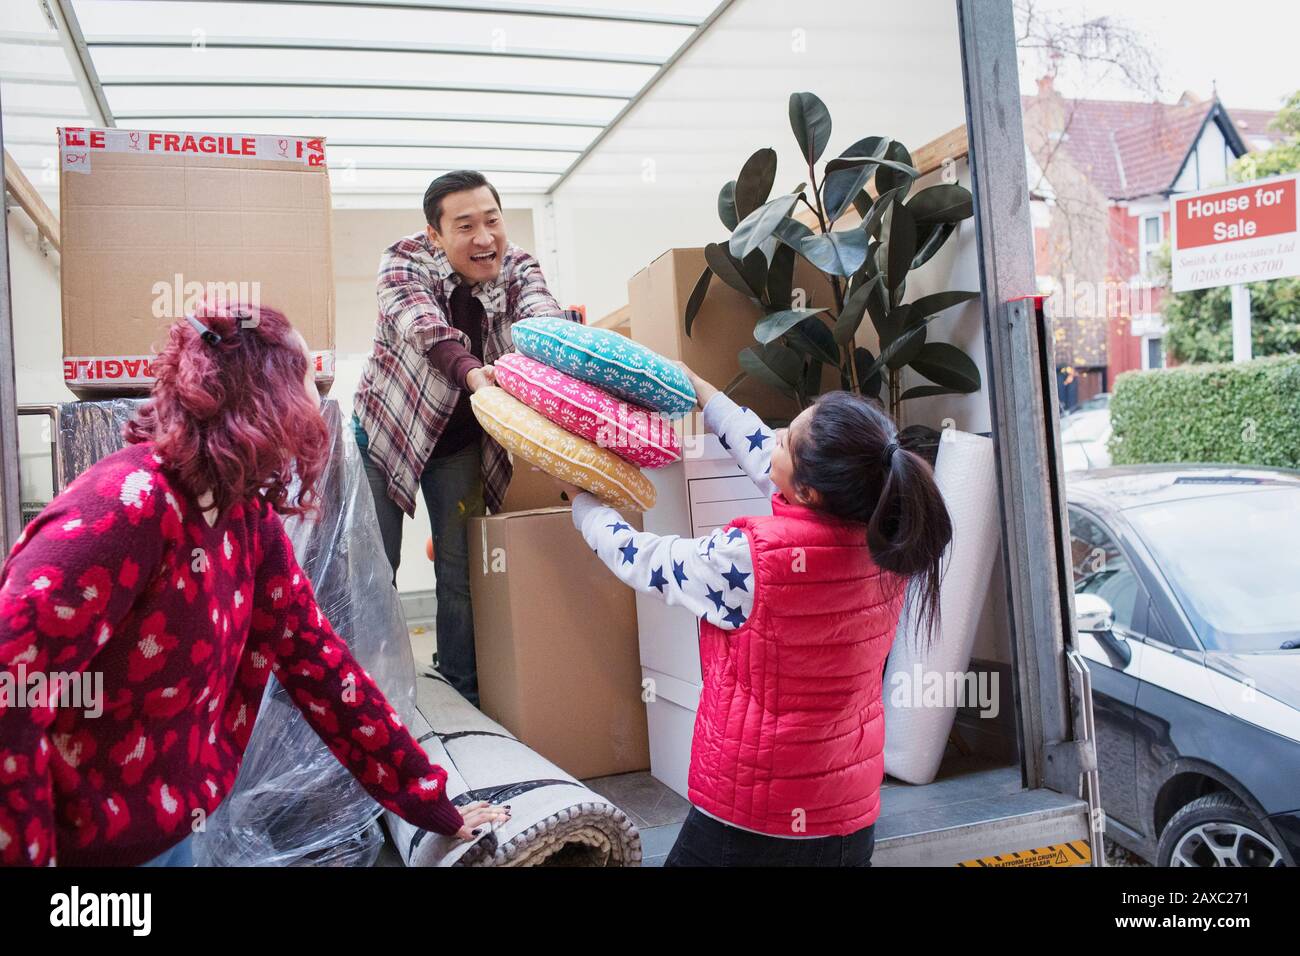 Friends moving, unloading moving van Stock Photo